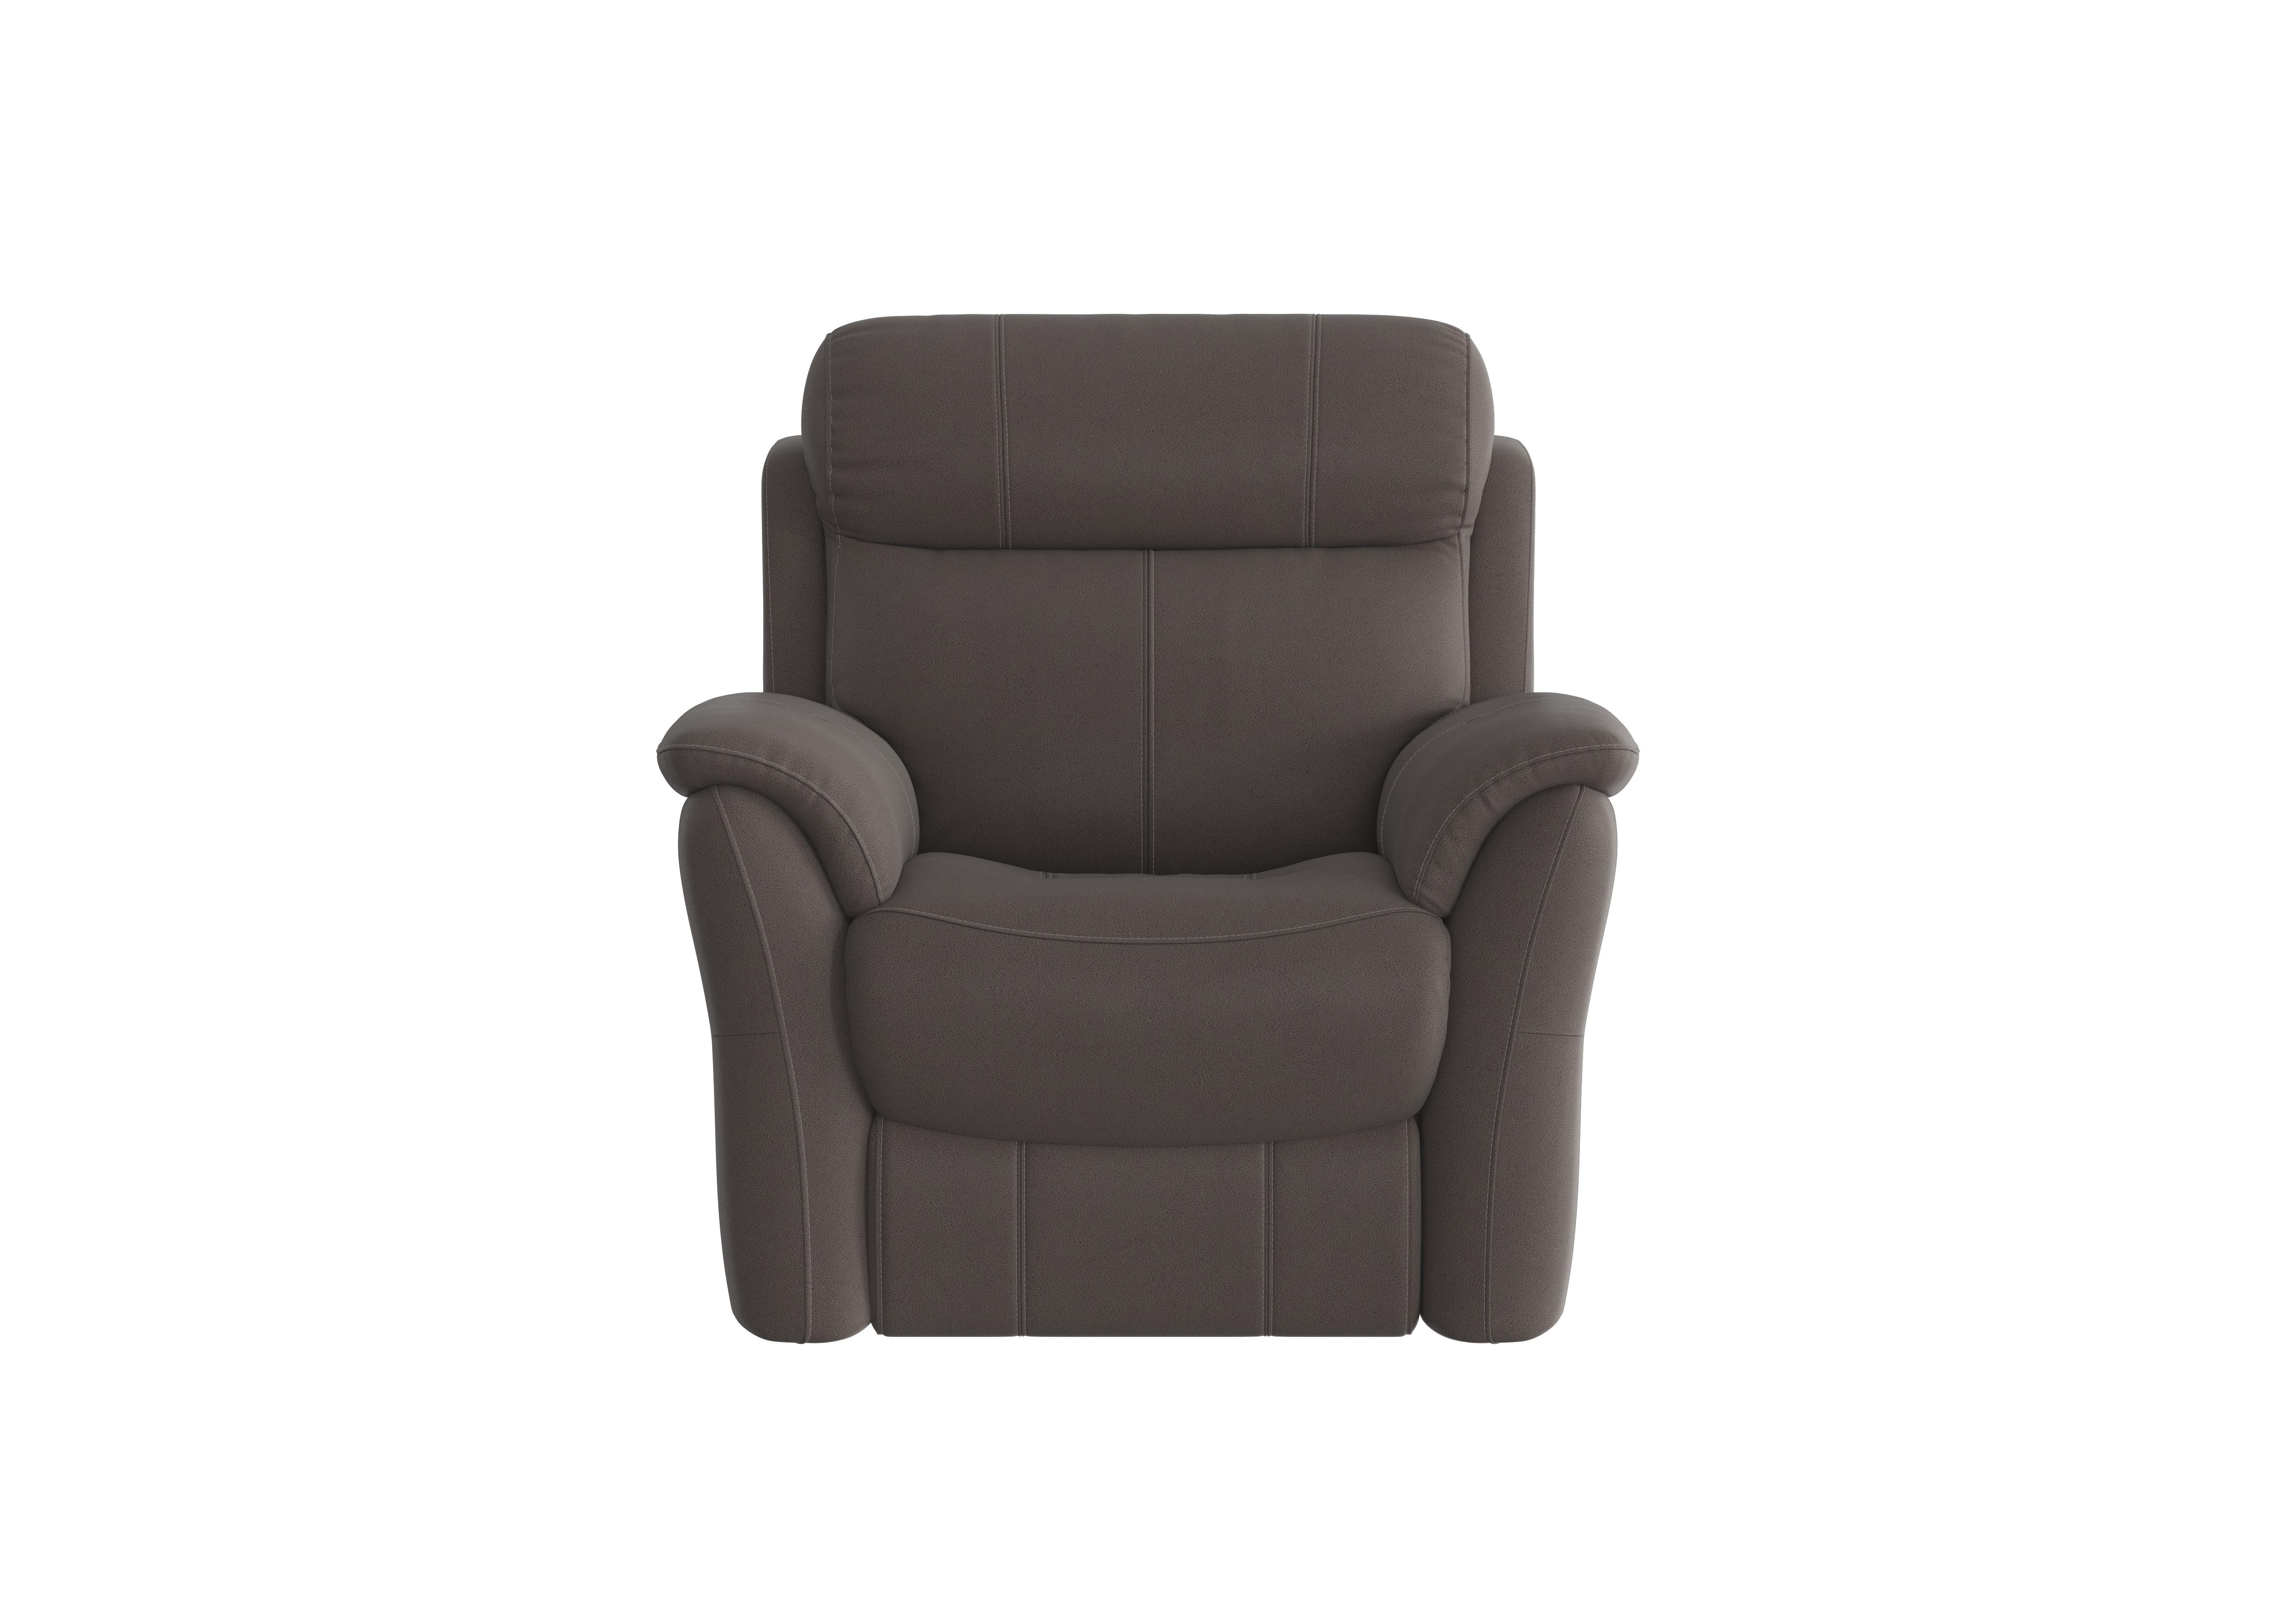 Relax Station Revive Fabric Armchair in Bfa-Blj-R16 Grey on Furniture Village